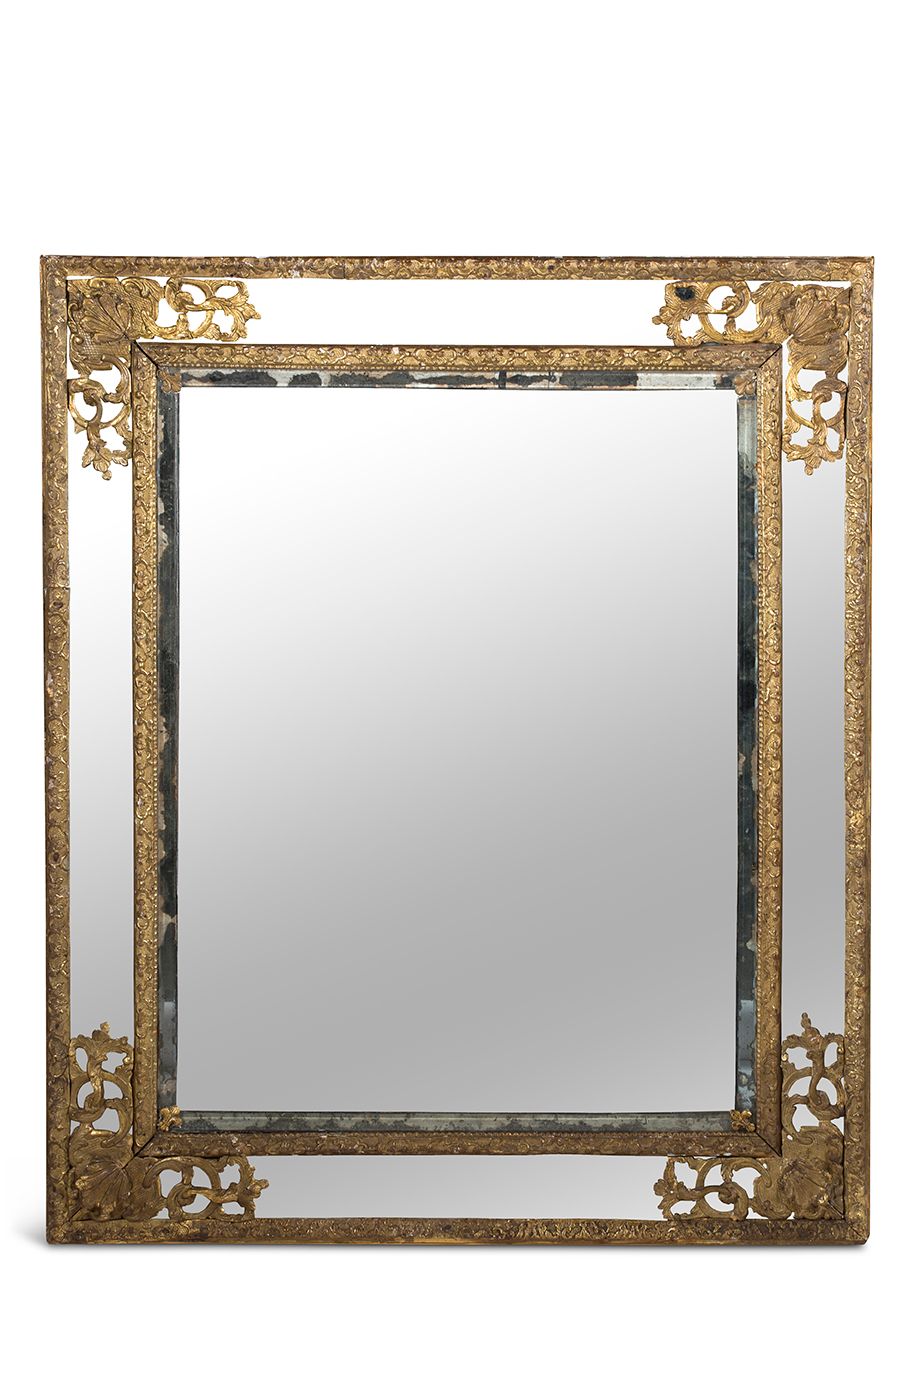 Null LARGE MIRROR with glazing beads, rectangular in shape, carved and gilded wi&hellip;